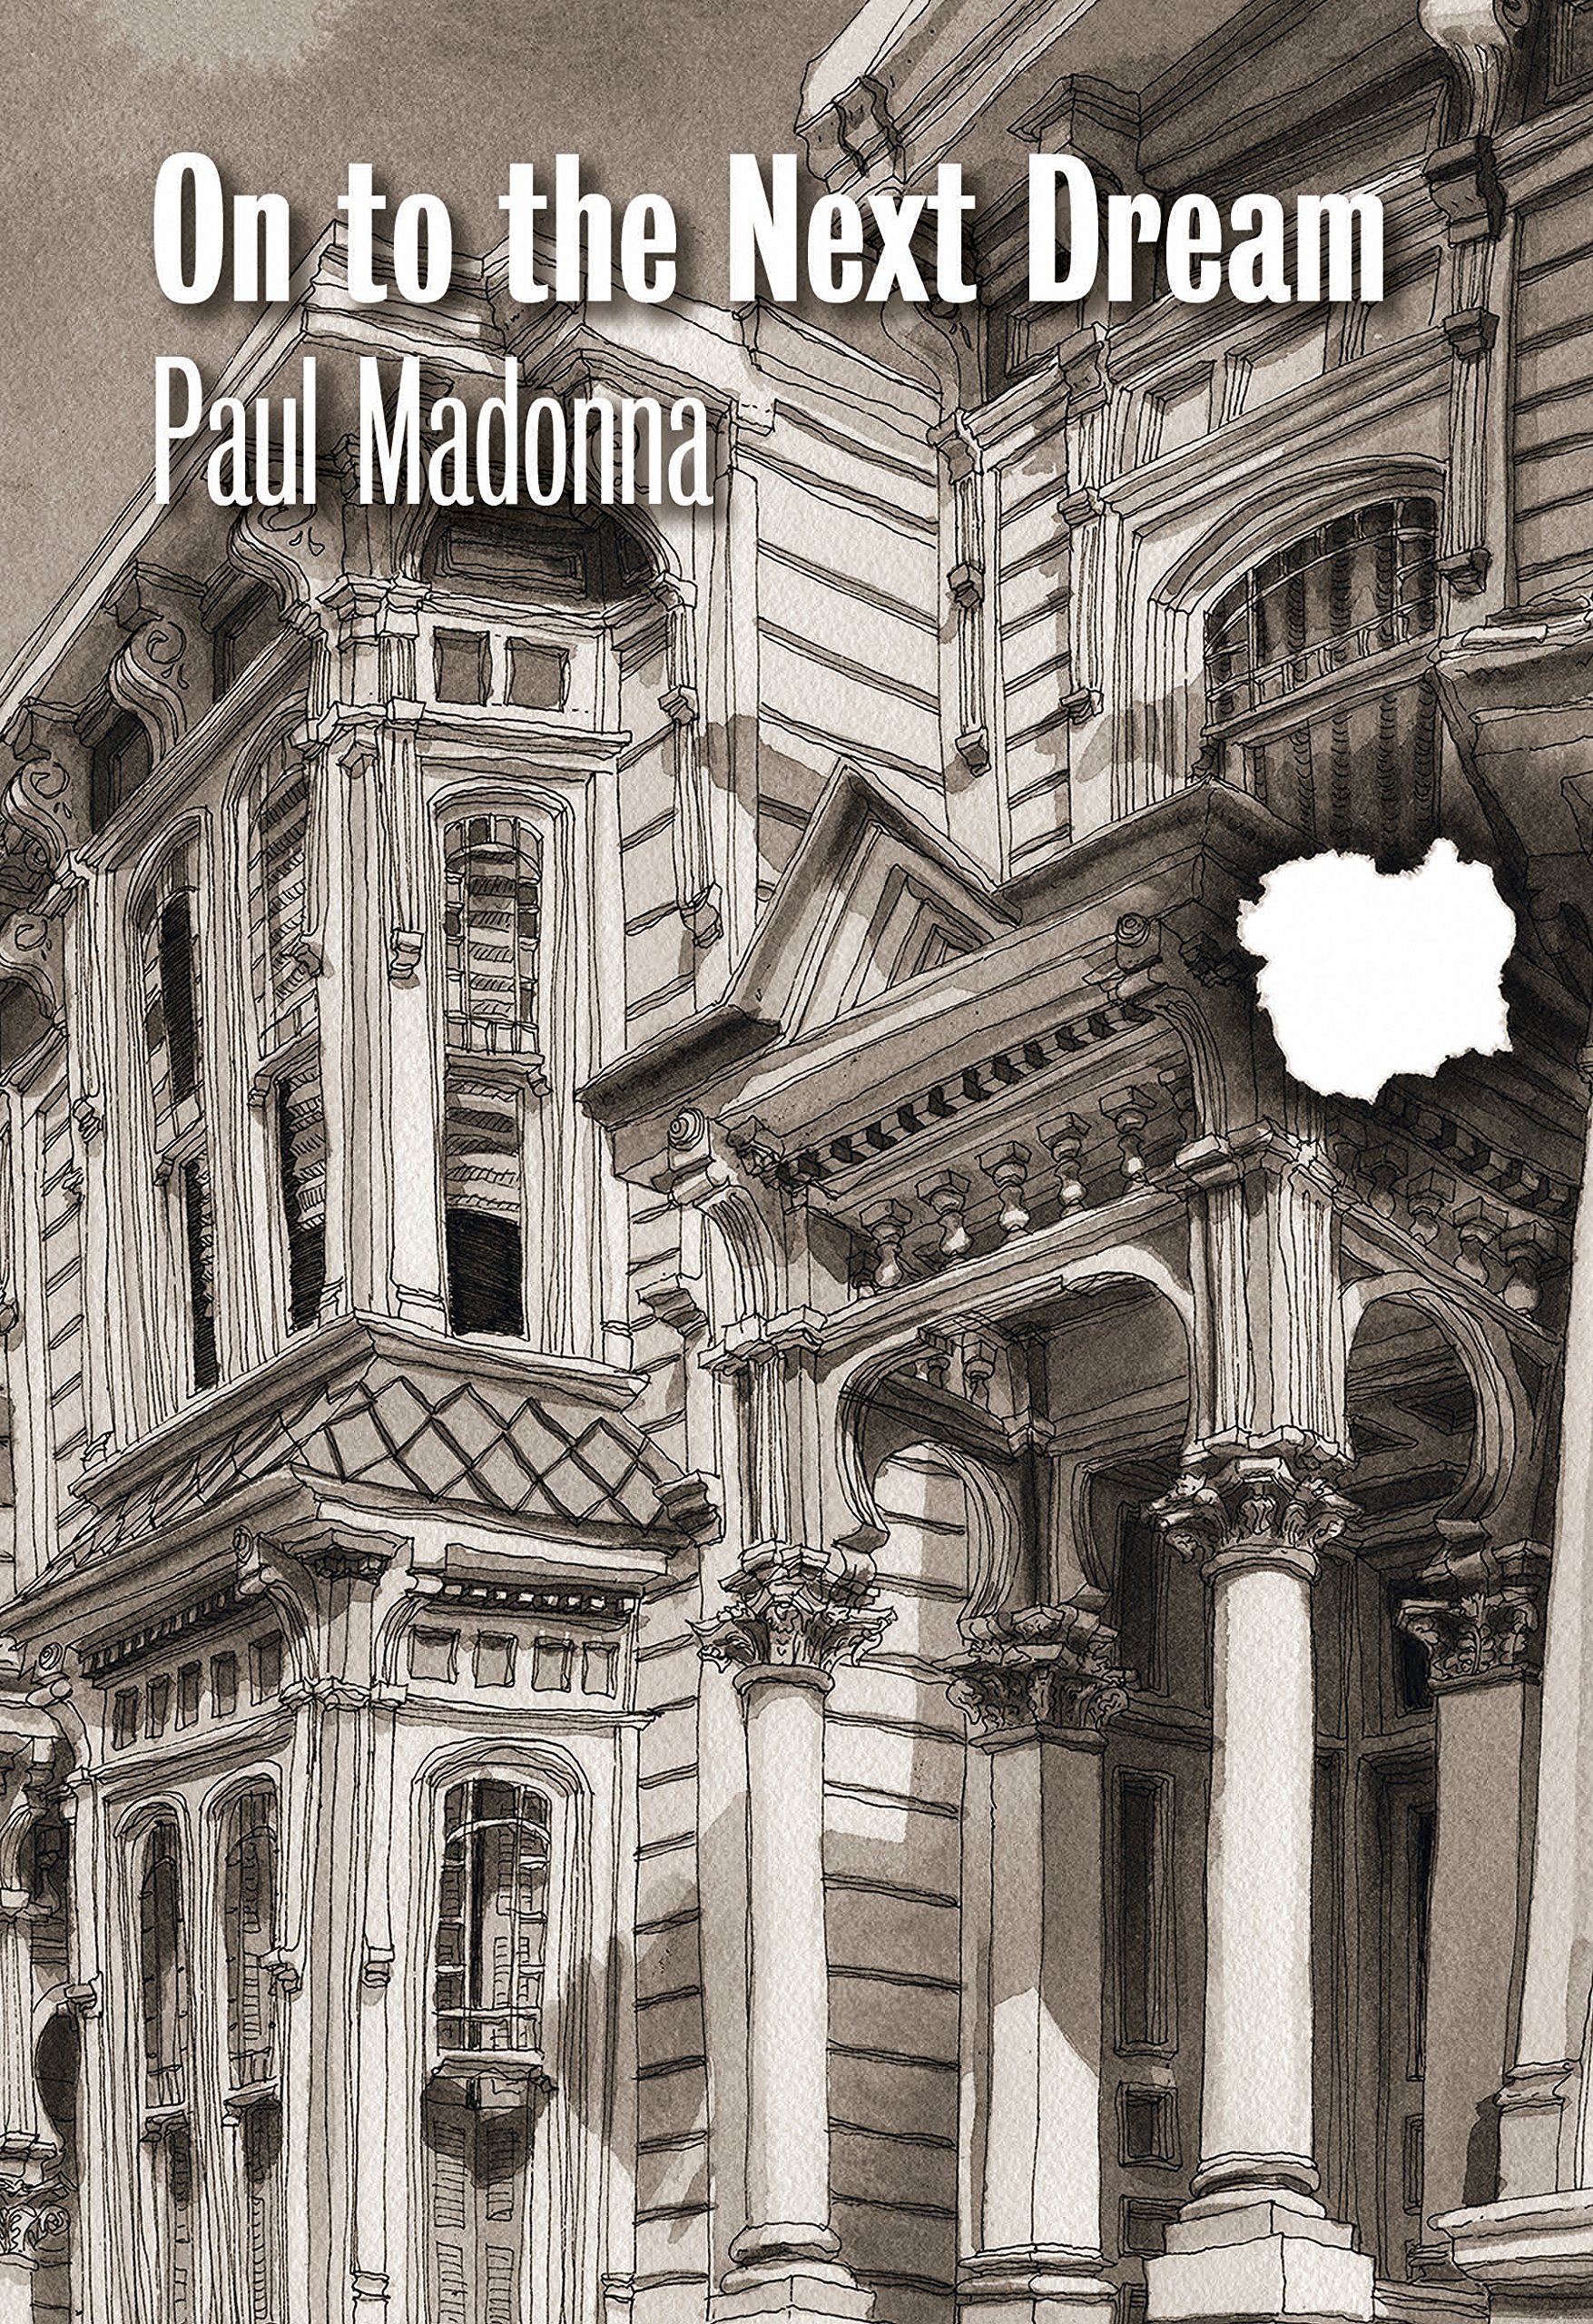 On to the Next Dream | Paul Madonna